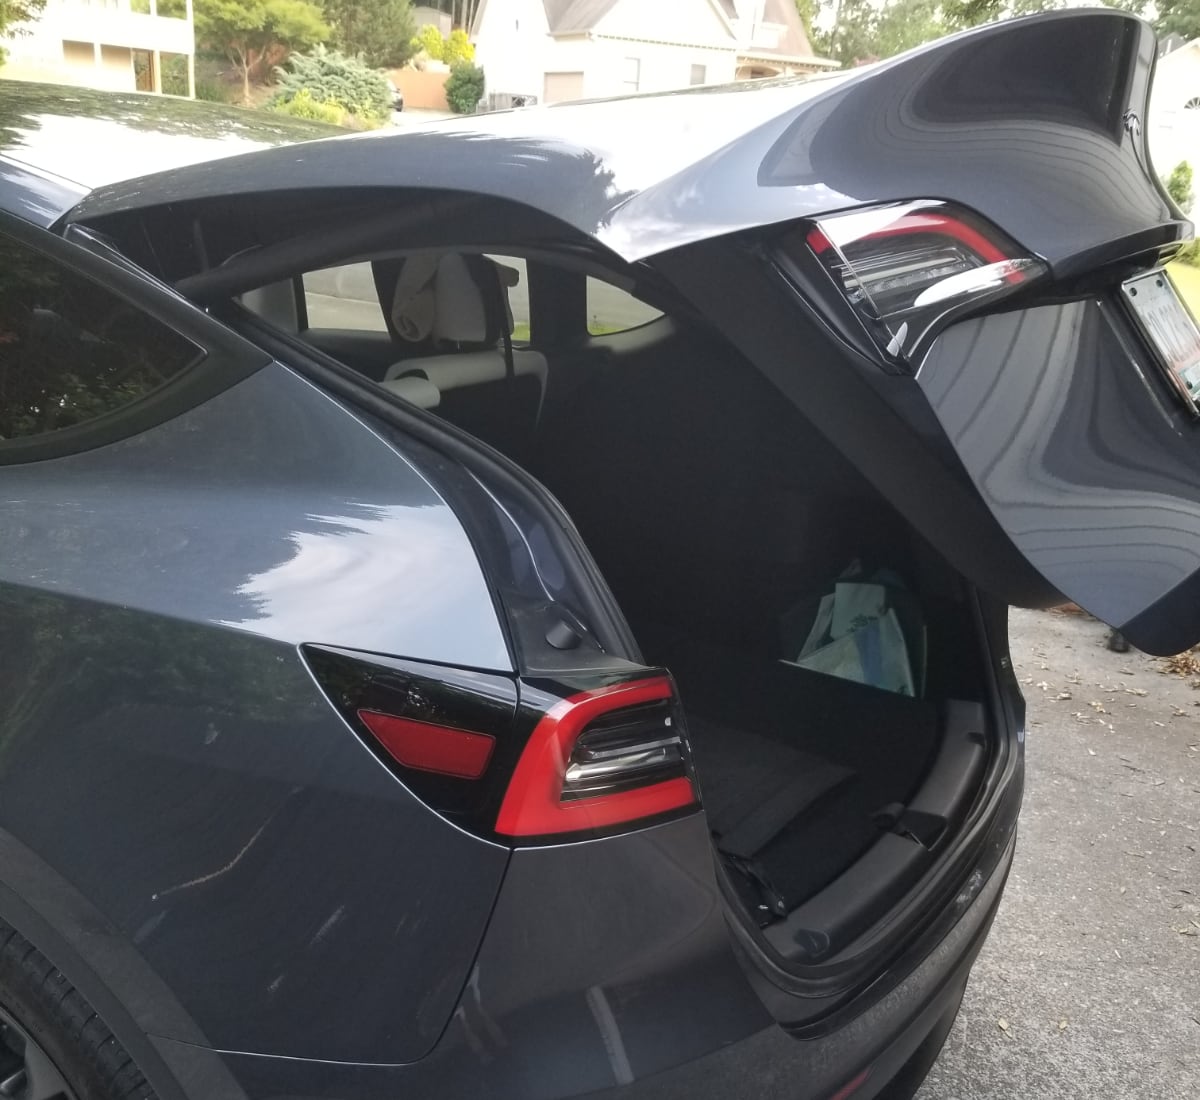 All recent Tesla vehicles include a powered trunk